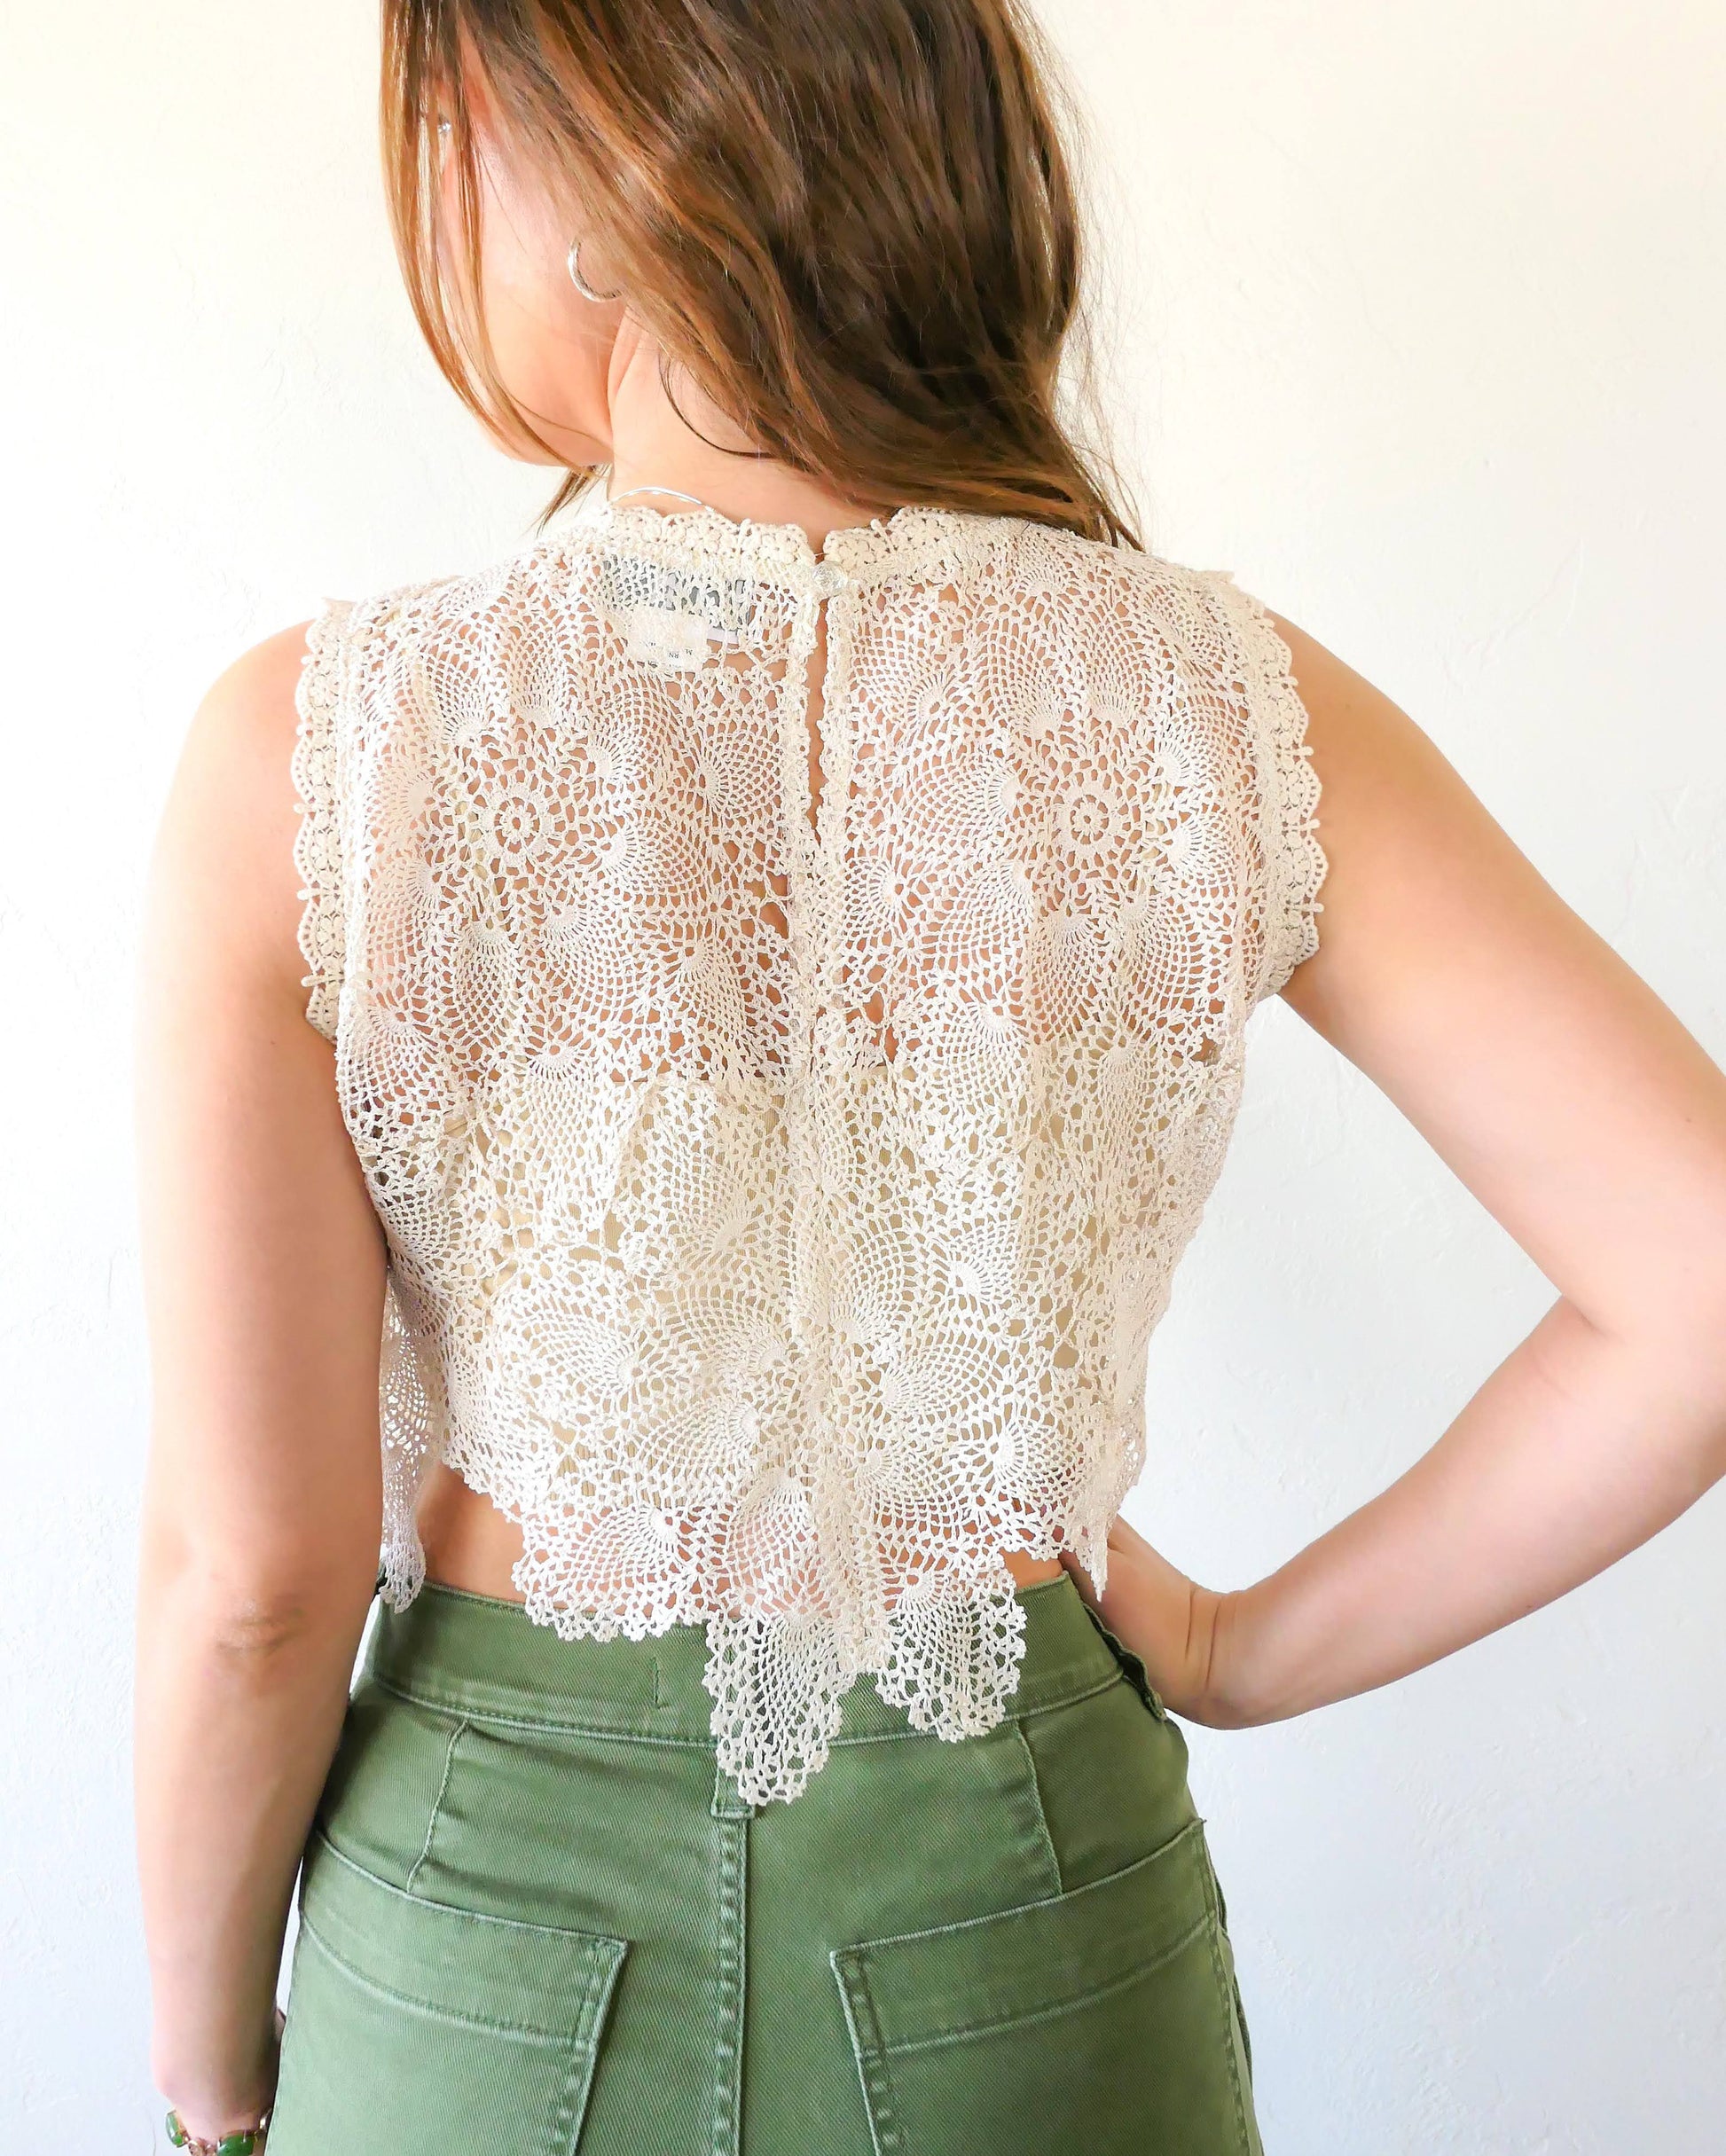 Back view of top. An ultra casual, hip, and boho-chic crop tank top made with interconnected flower doilies reminiscent of the white lotus, which symbolizes peace, tranquility, and calmness.  Lace trim at the collar and sleeve.  Model is wearing a natural colored crochet top. 